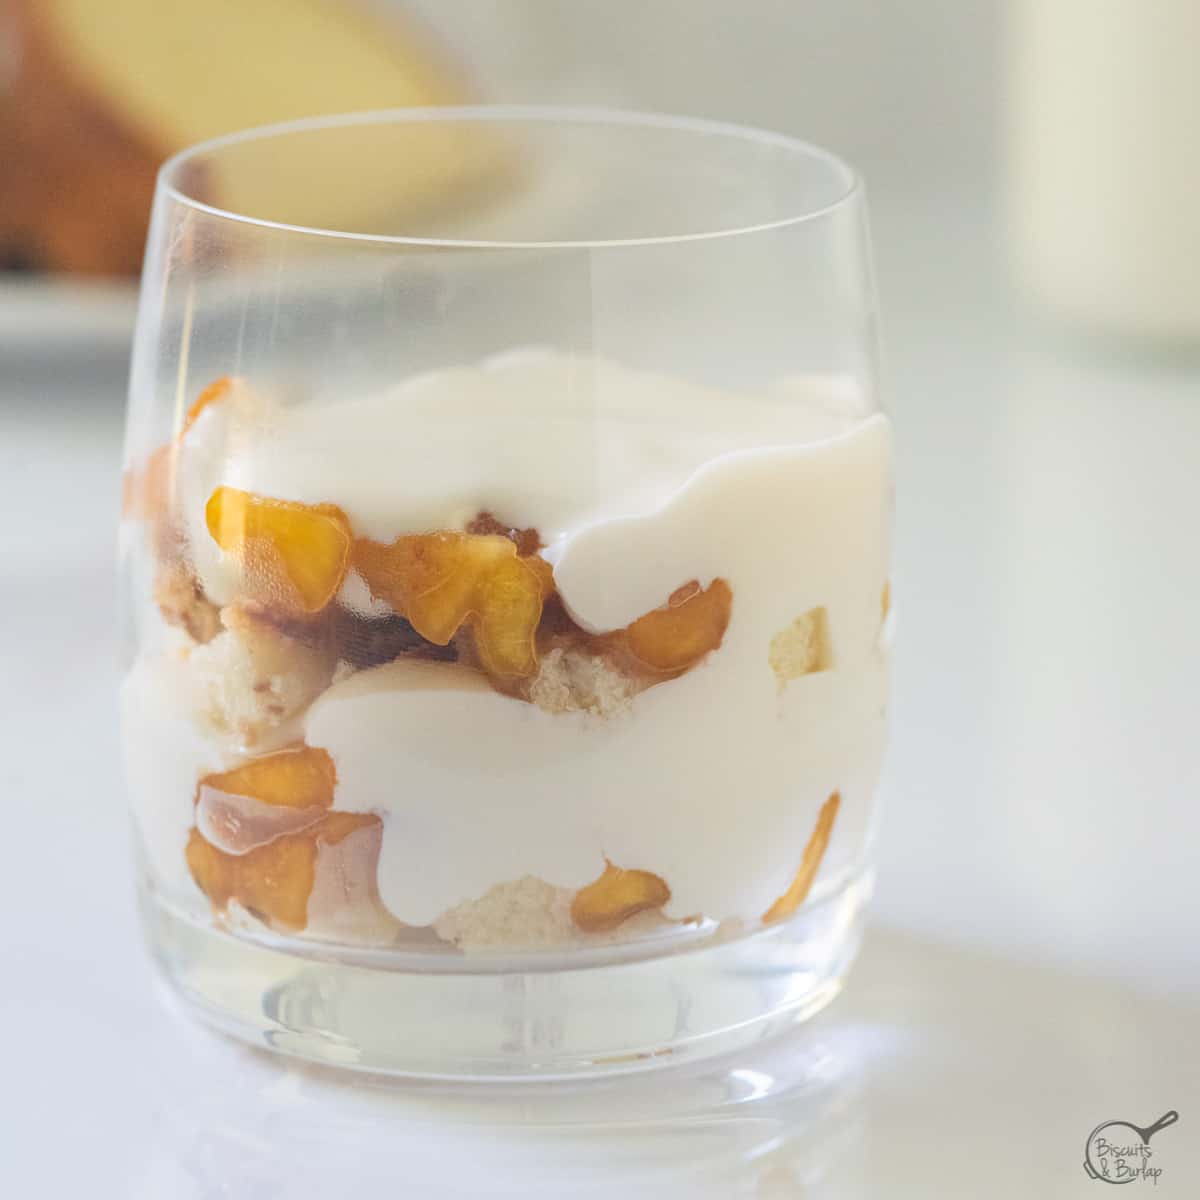 square shot of peach trifle in glass.